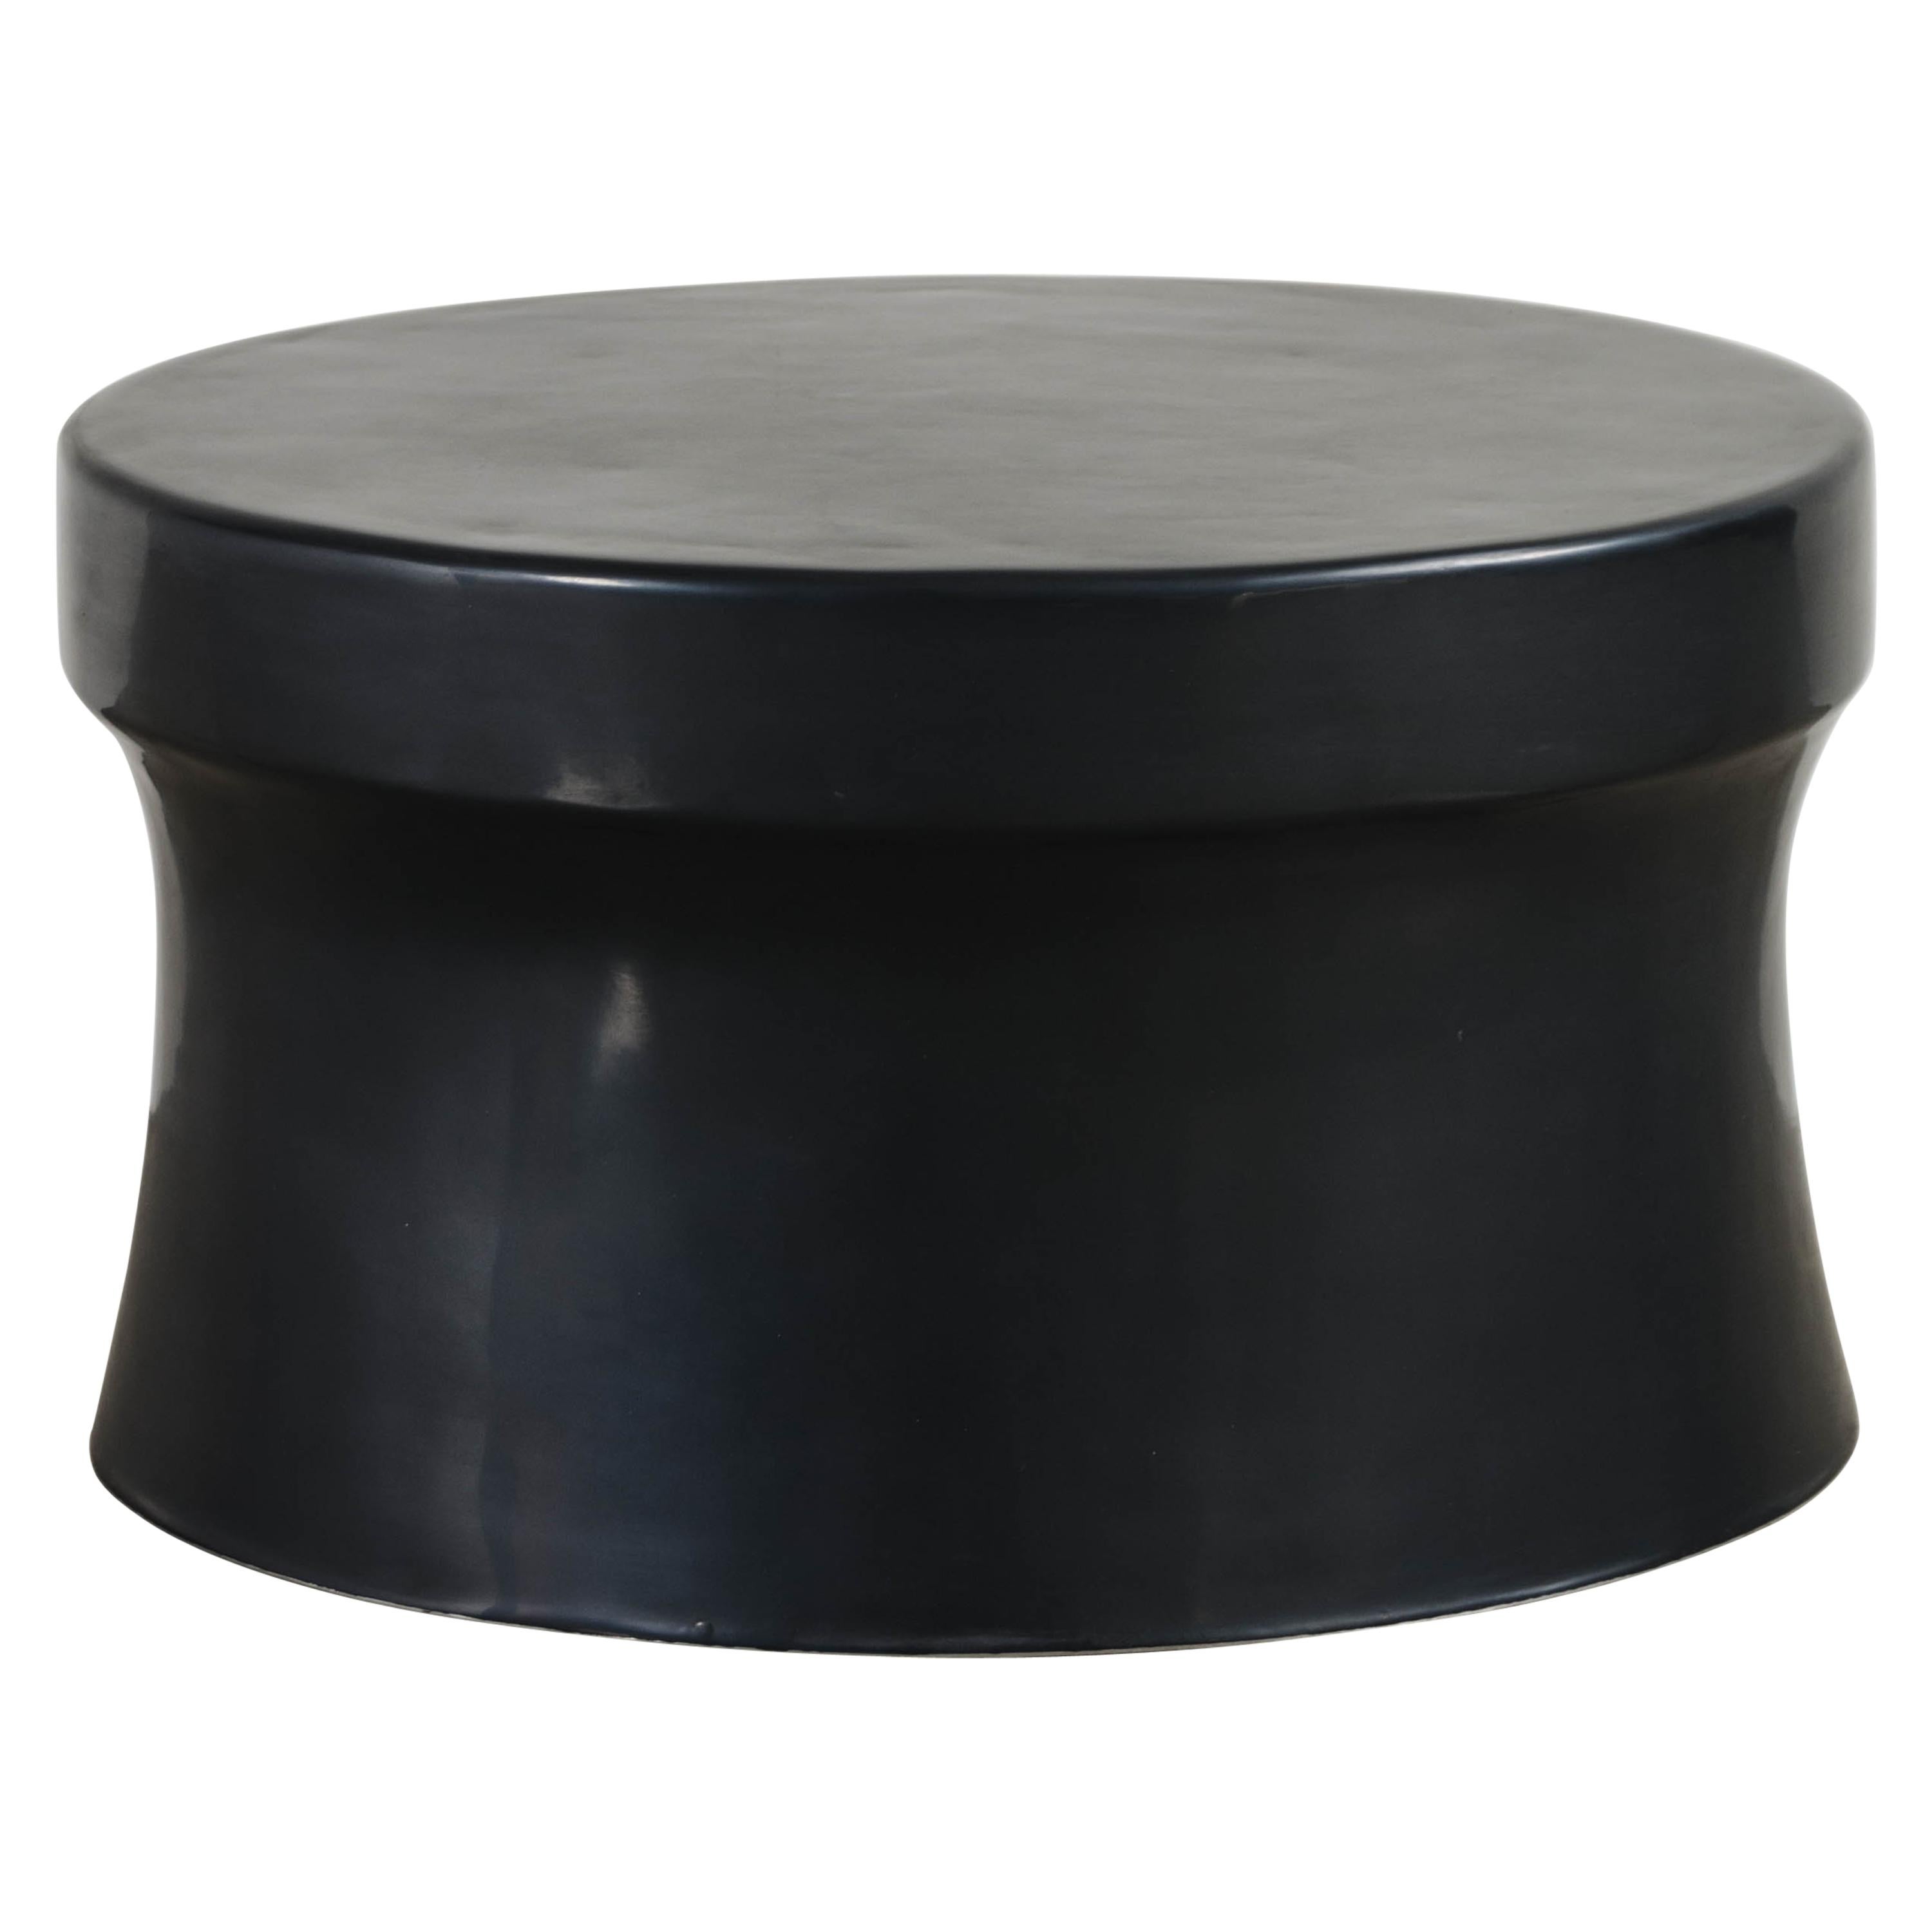 Oval Dong Shan Table, Black Lacquer by Robert Kuo, Hand Repousse, Limited